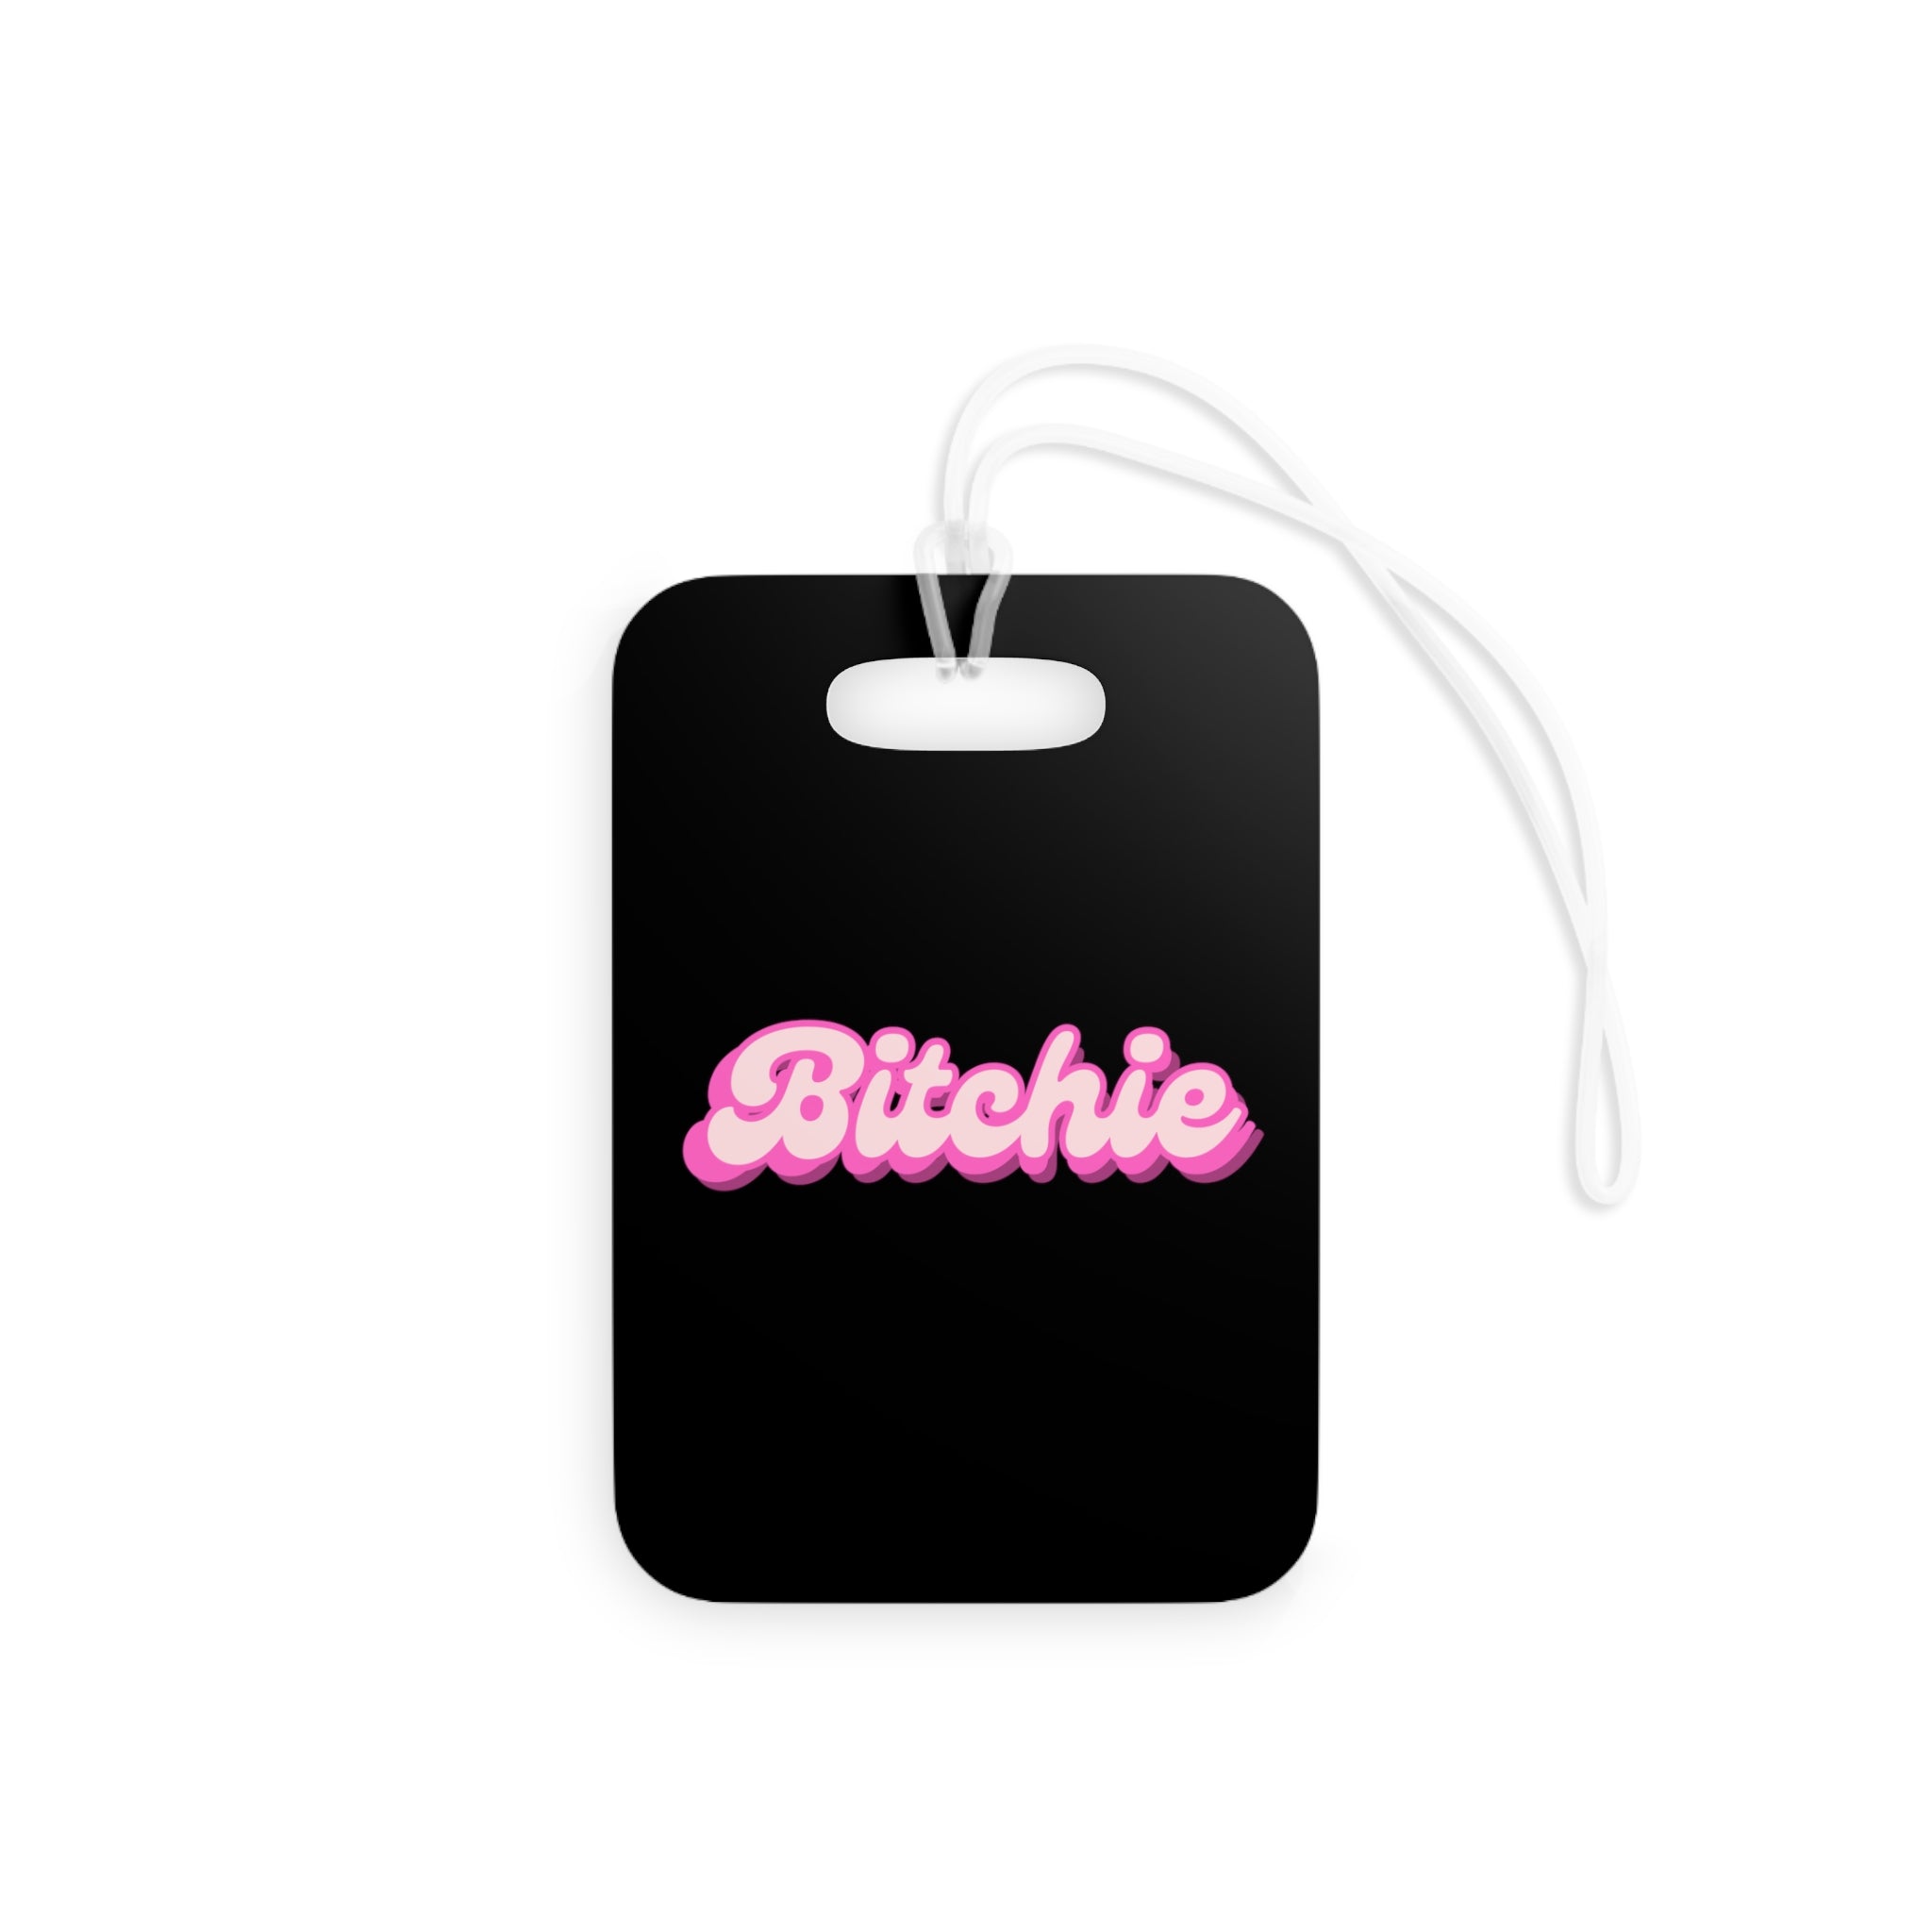  Bitchie (Barbie) Funny Luggage Tag in Black, Barbie Bag Tag, Funny Travel Lover Gift, Gift For Her Luggage Tag